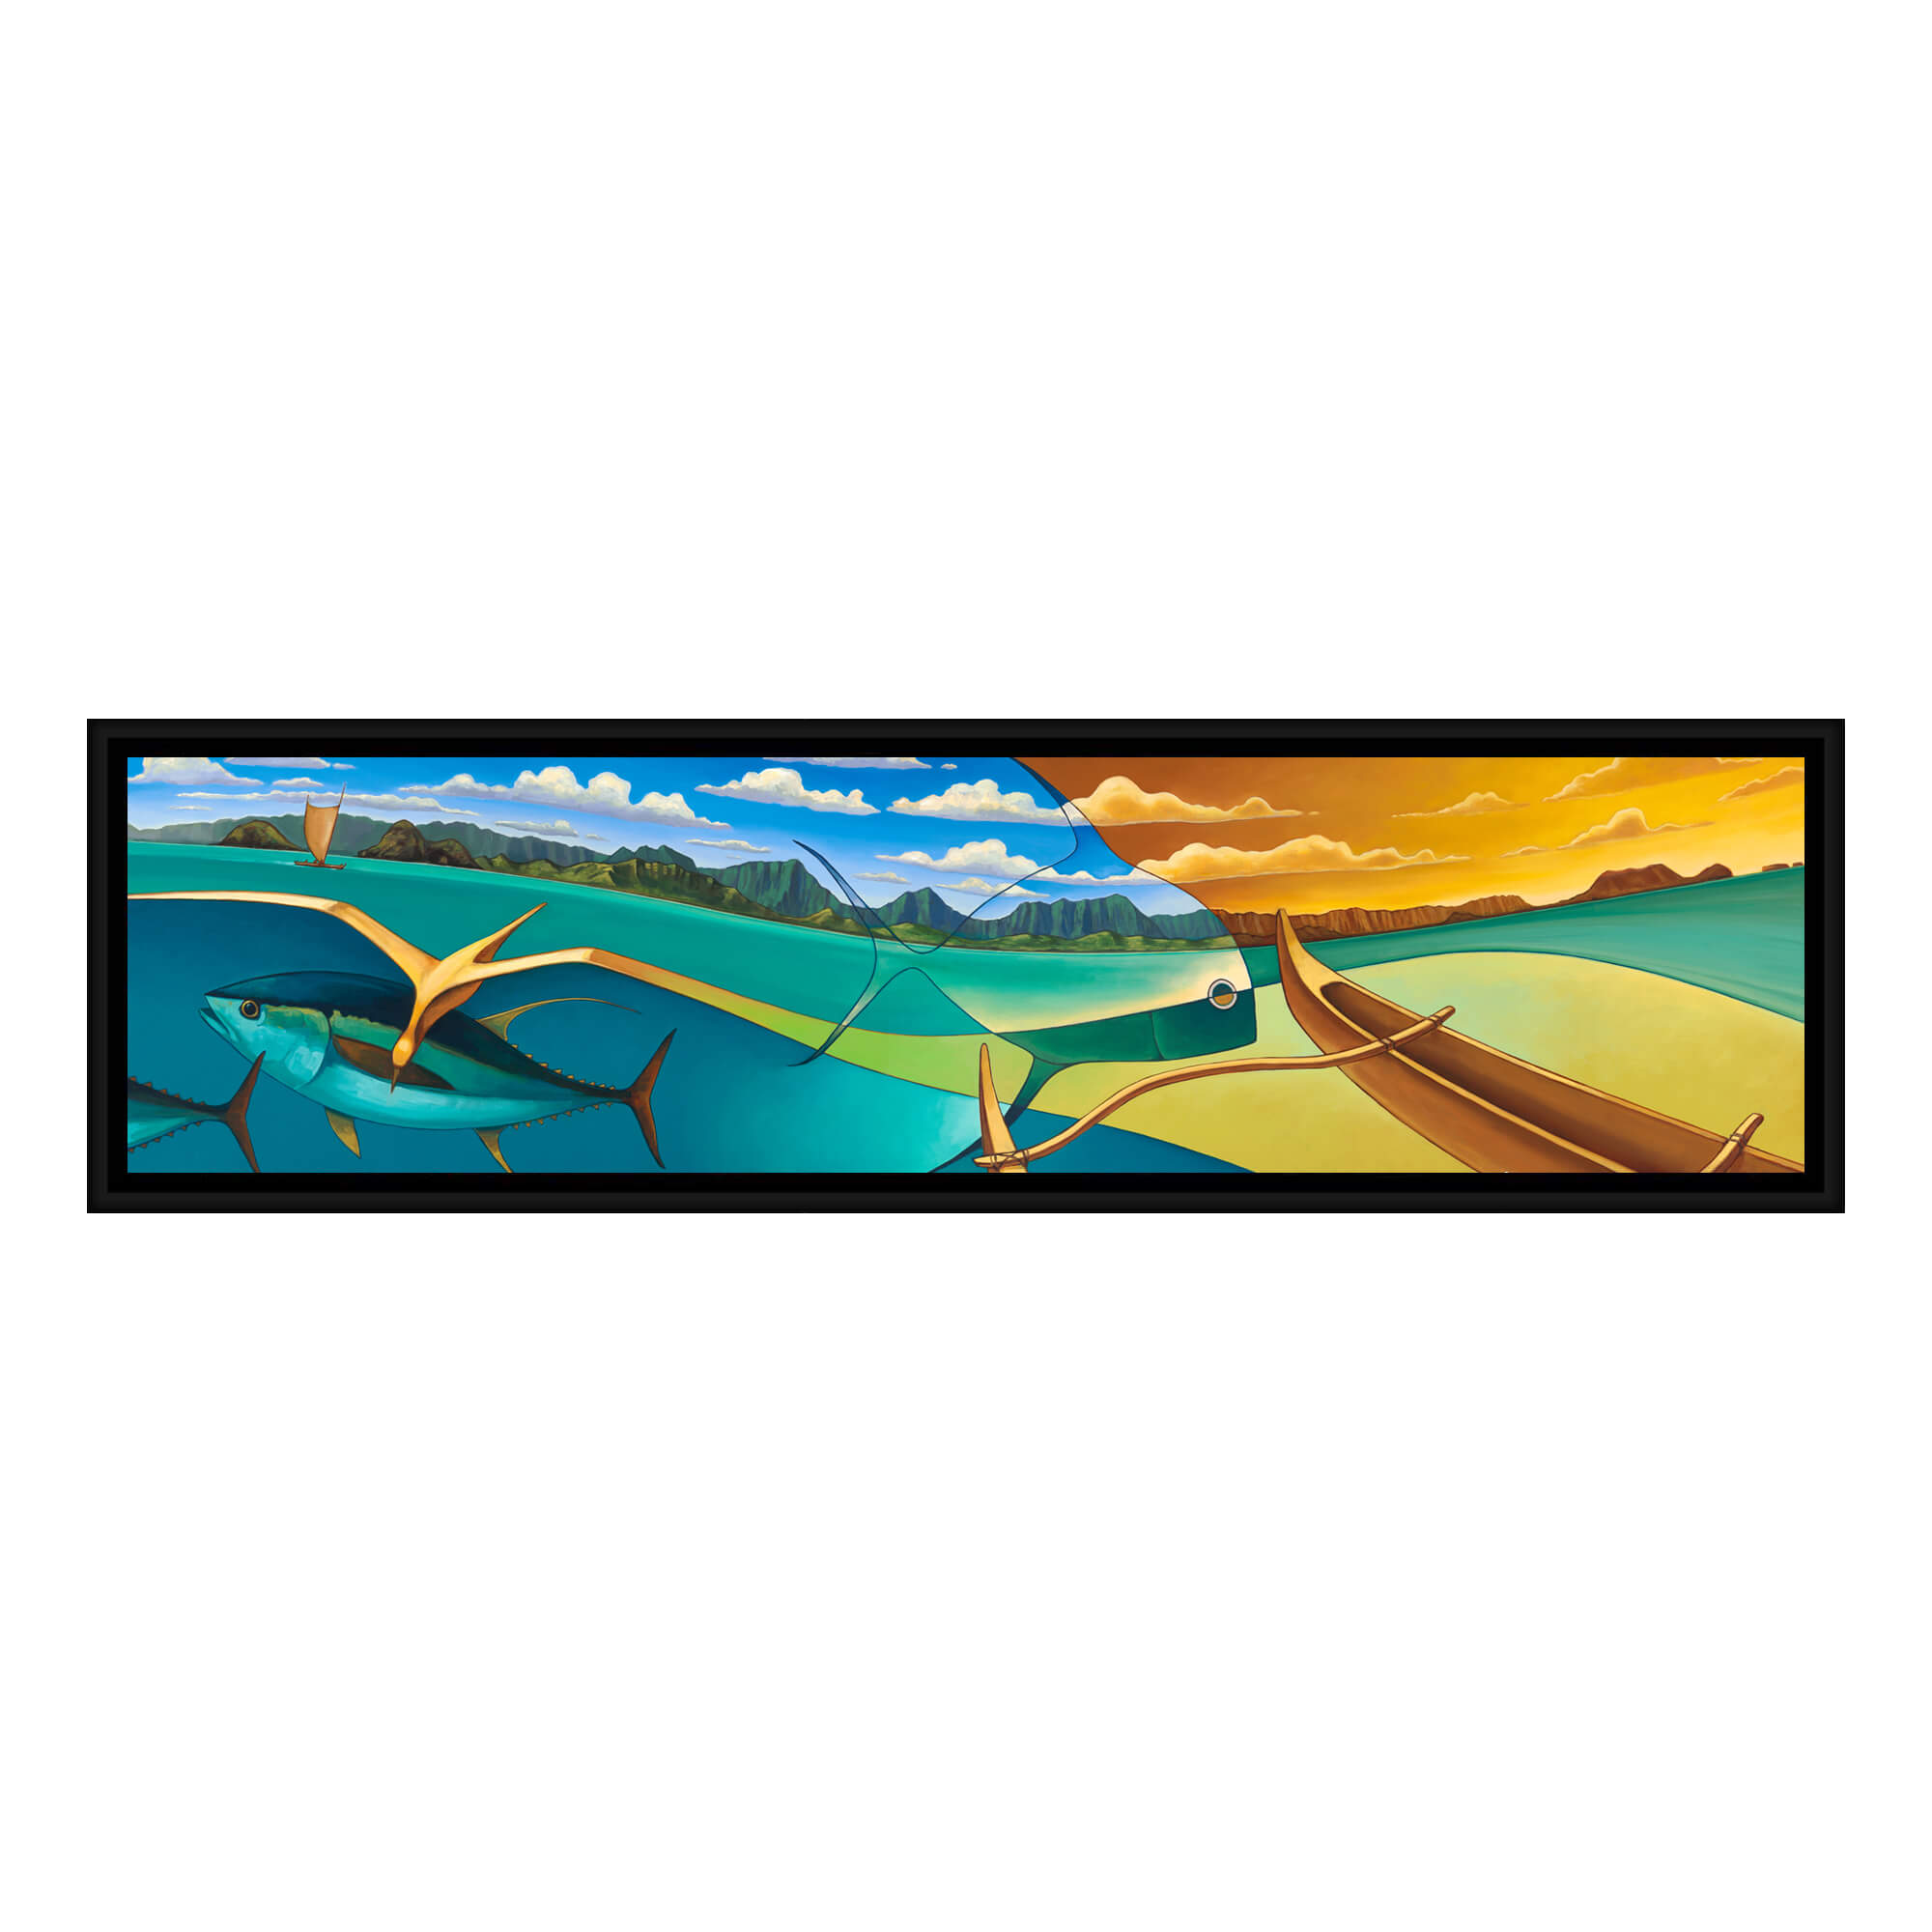 A panoramic painting of tuna fish and canoes by Hawaii artist Colin Redican